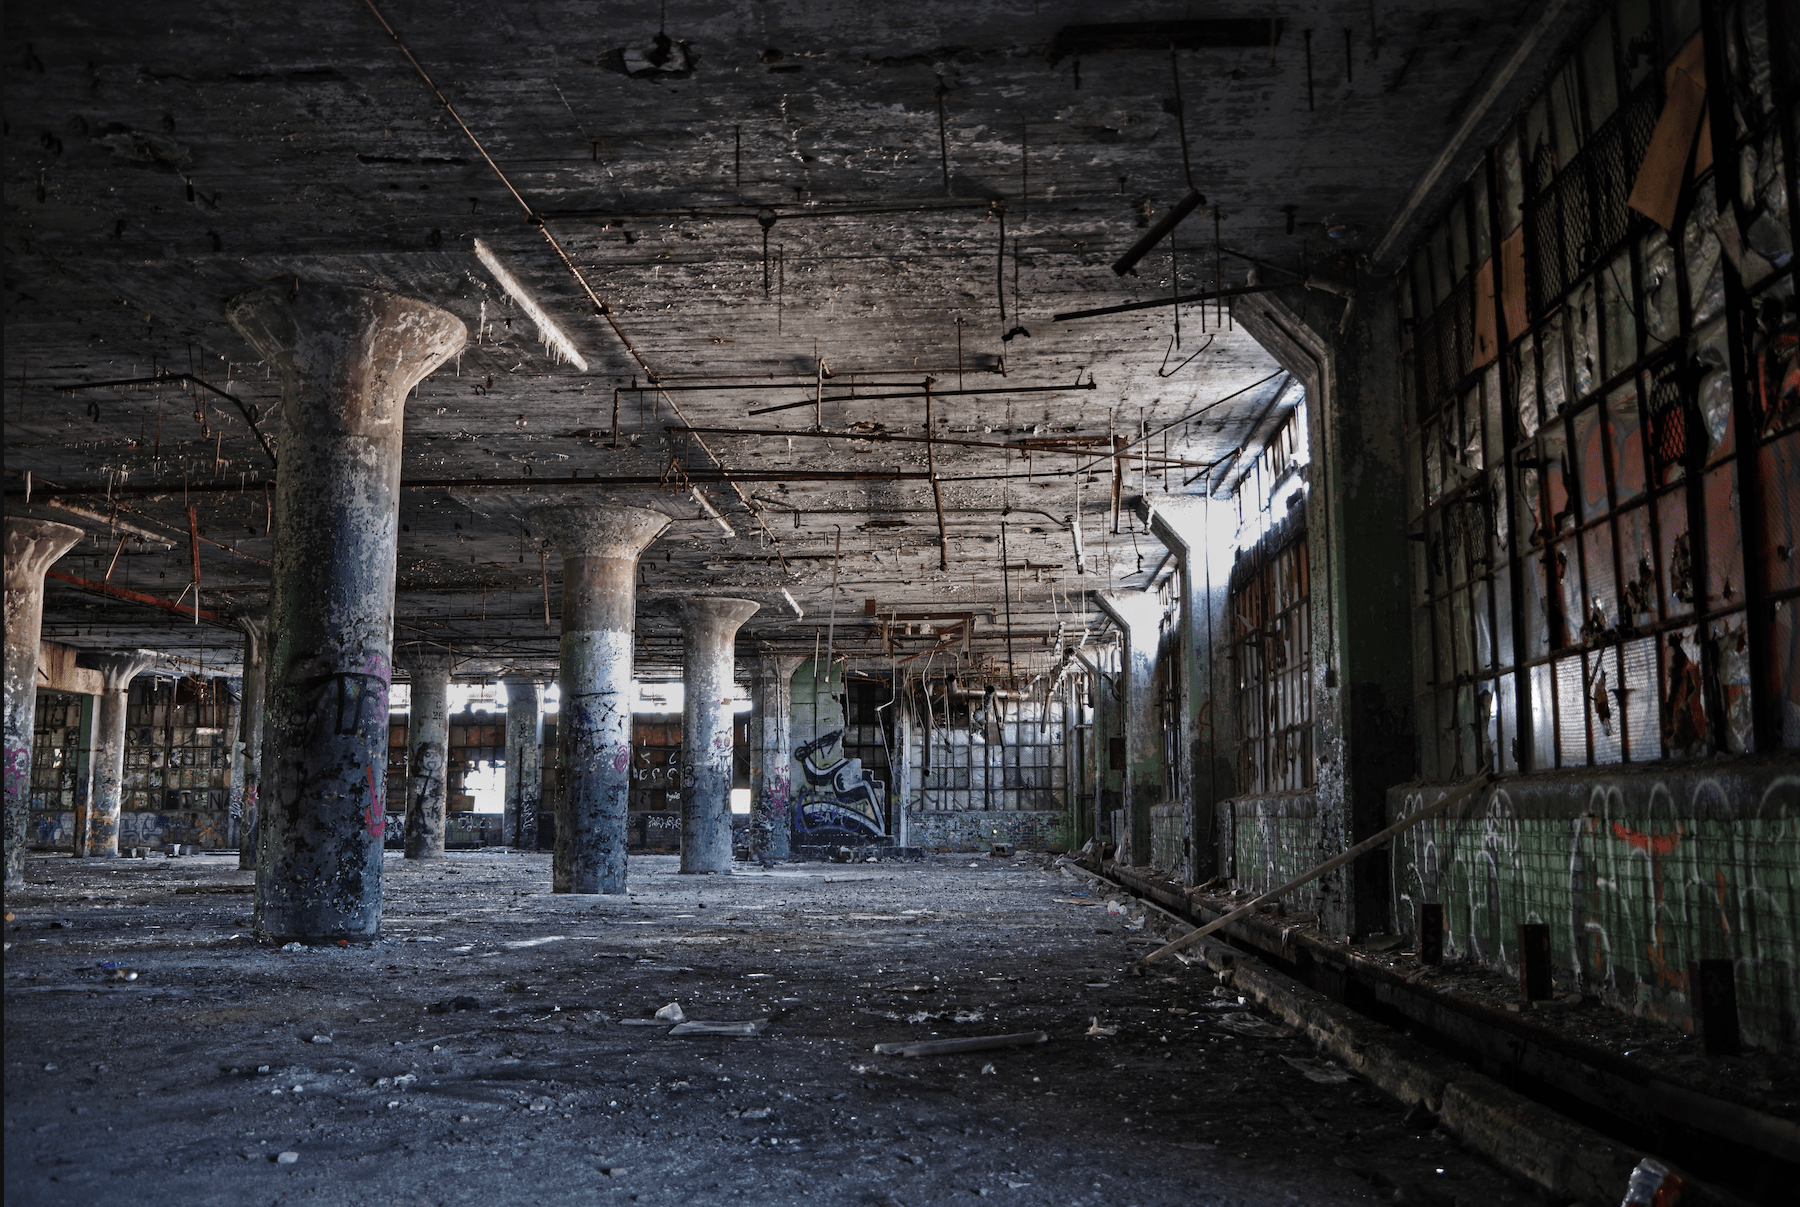 Inside color photograph showing amazing graffiti in the old packard plant in Detroit.